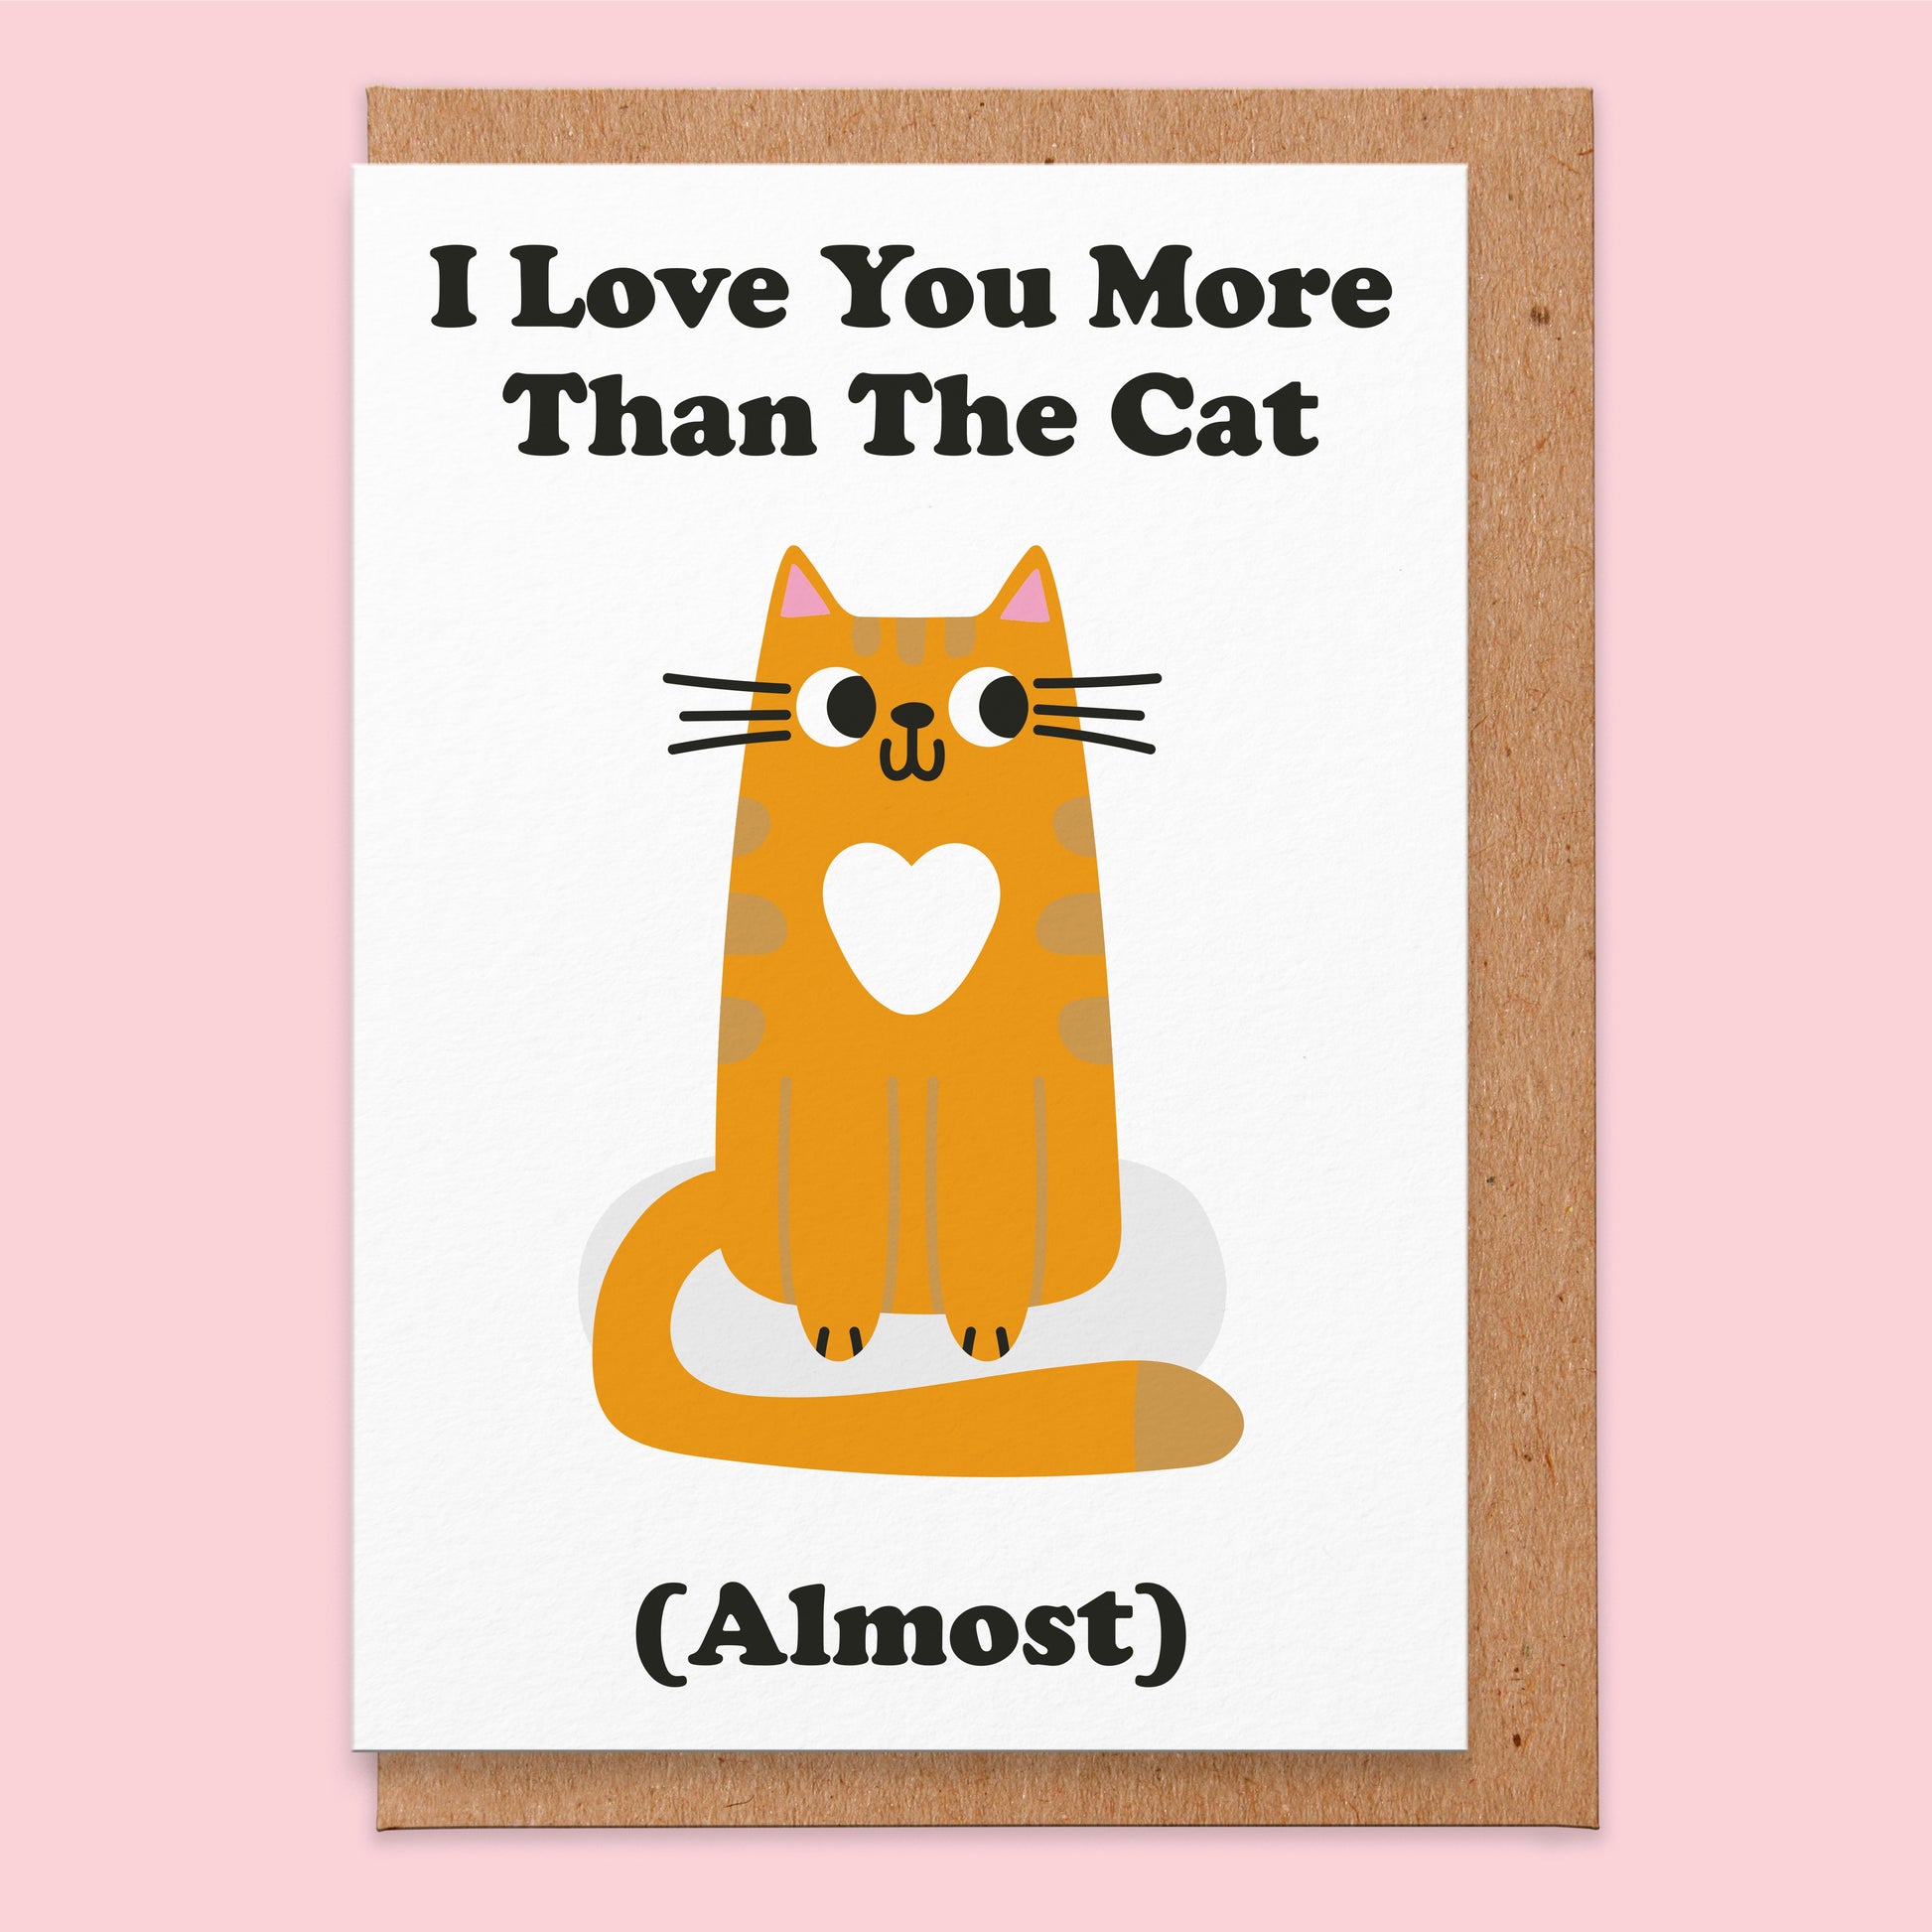 Love card that reads I love you more than the cat (almost)with an illustration of a ginger cat that has a white bit on it's chest in the shape of a love heart.